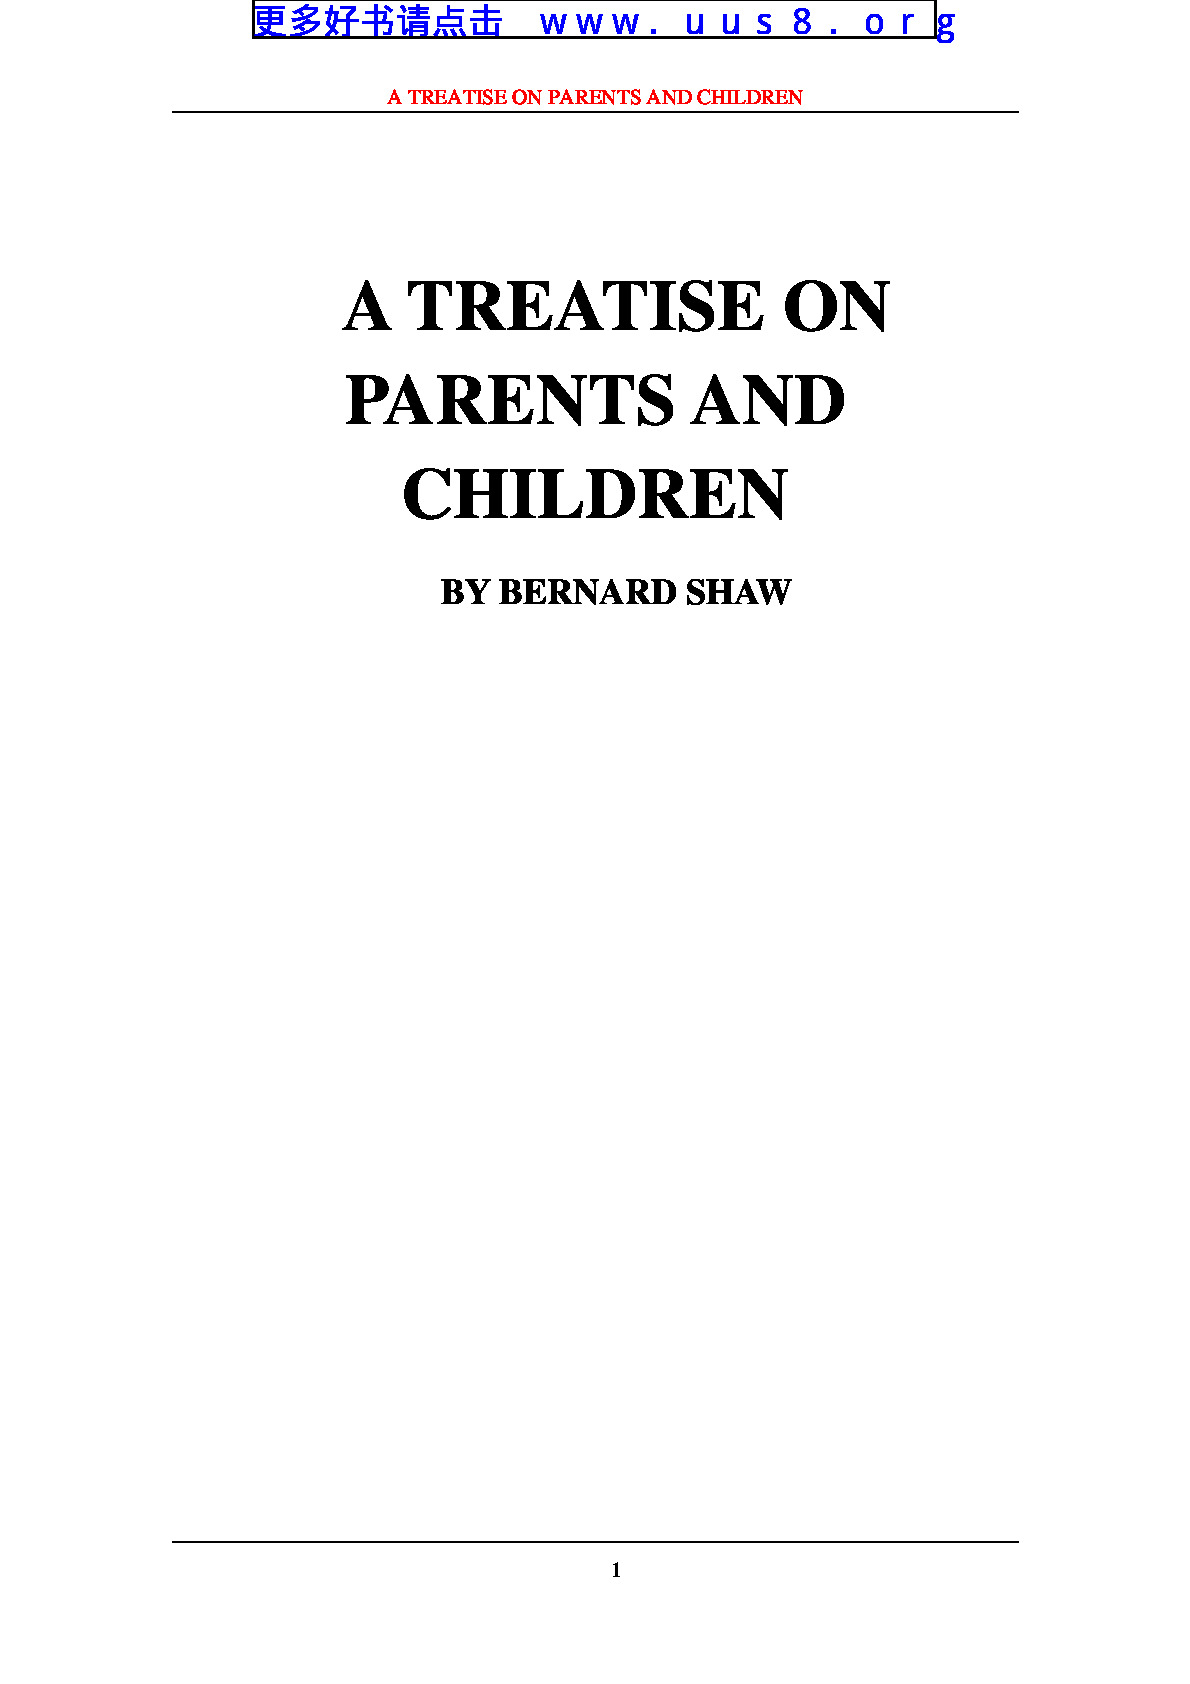 a_treatise_on_parents_and_children(父母与子女专题研究)